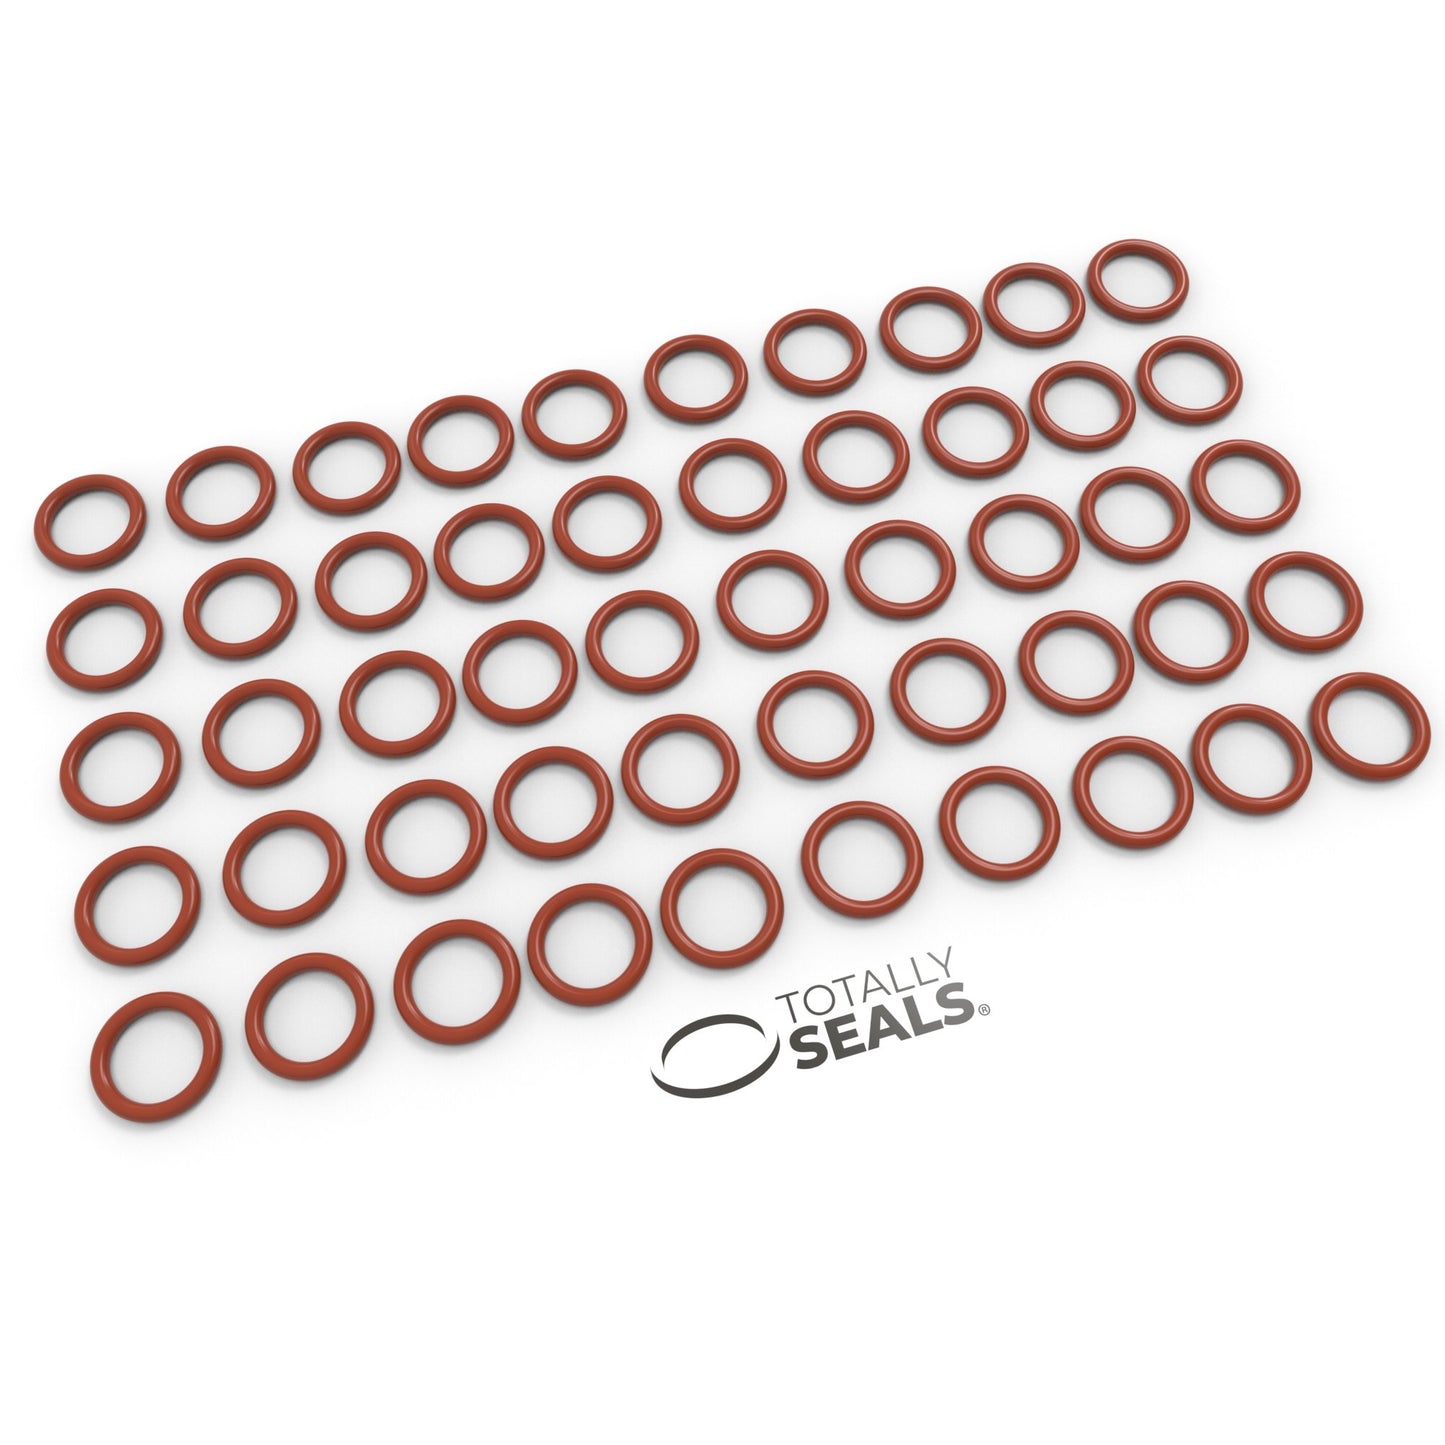 14mm x 2.5mm (19mm OD) Silicone O-Rings - Totally Seals®